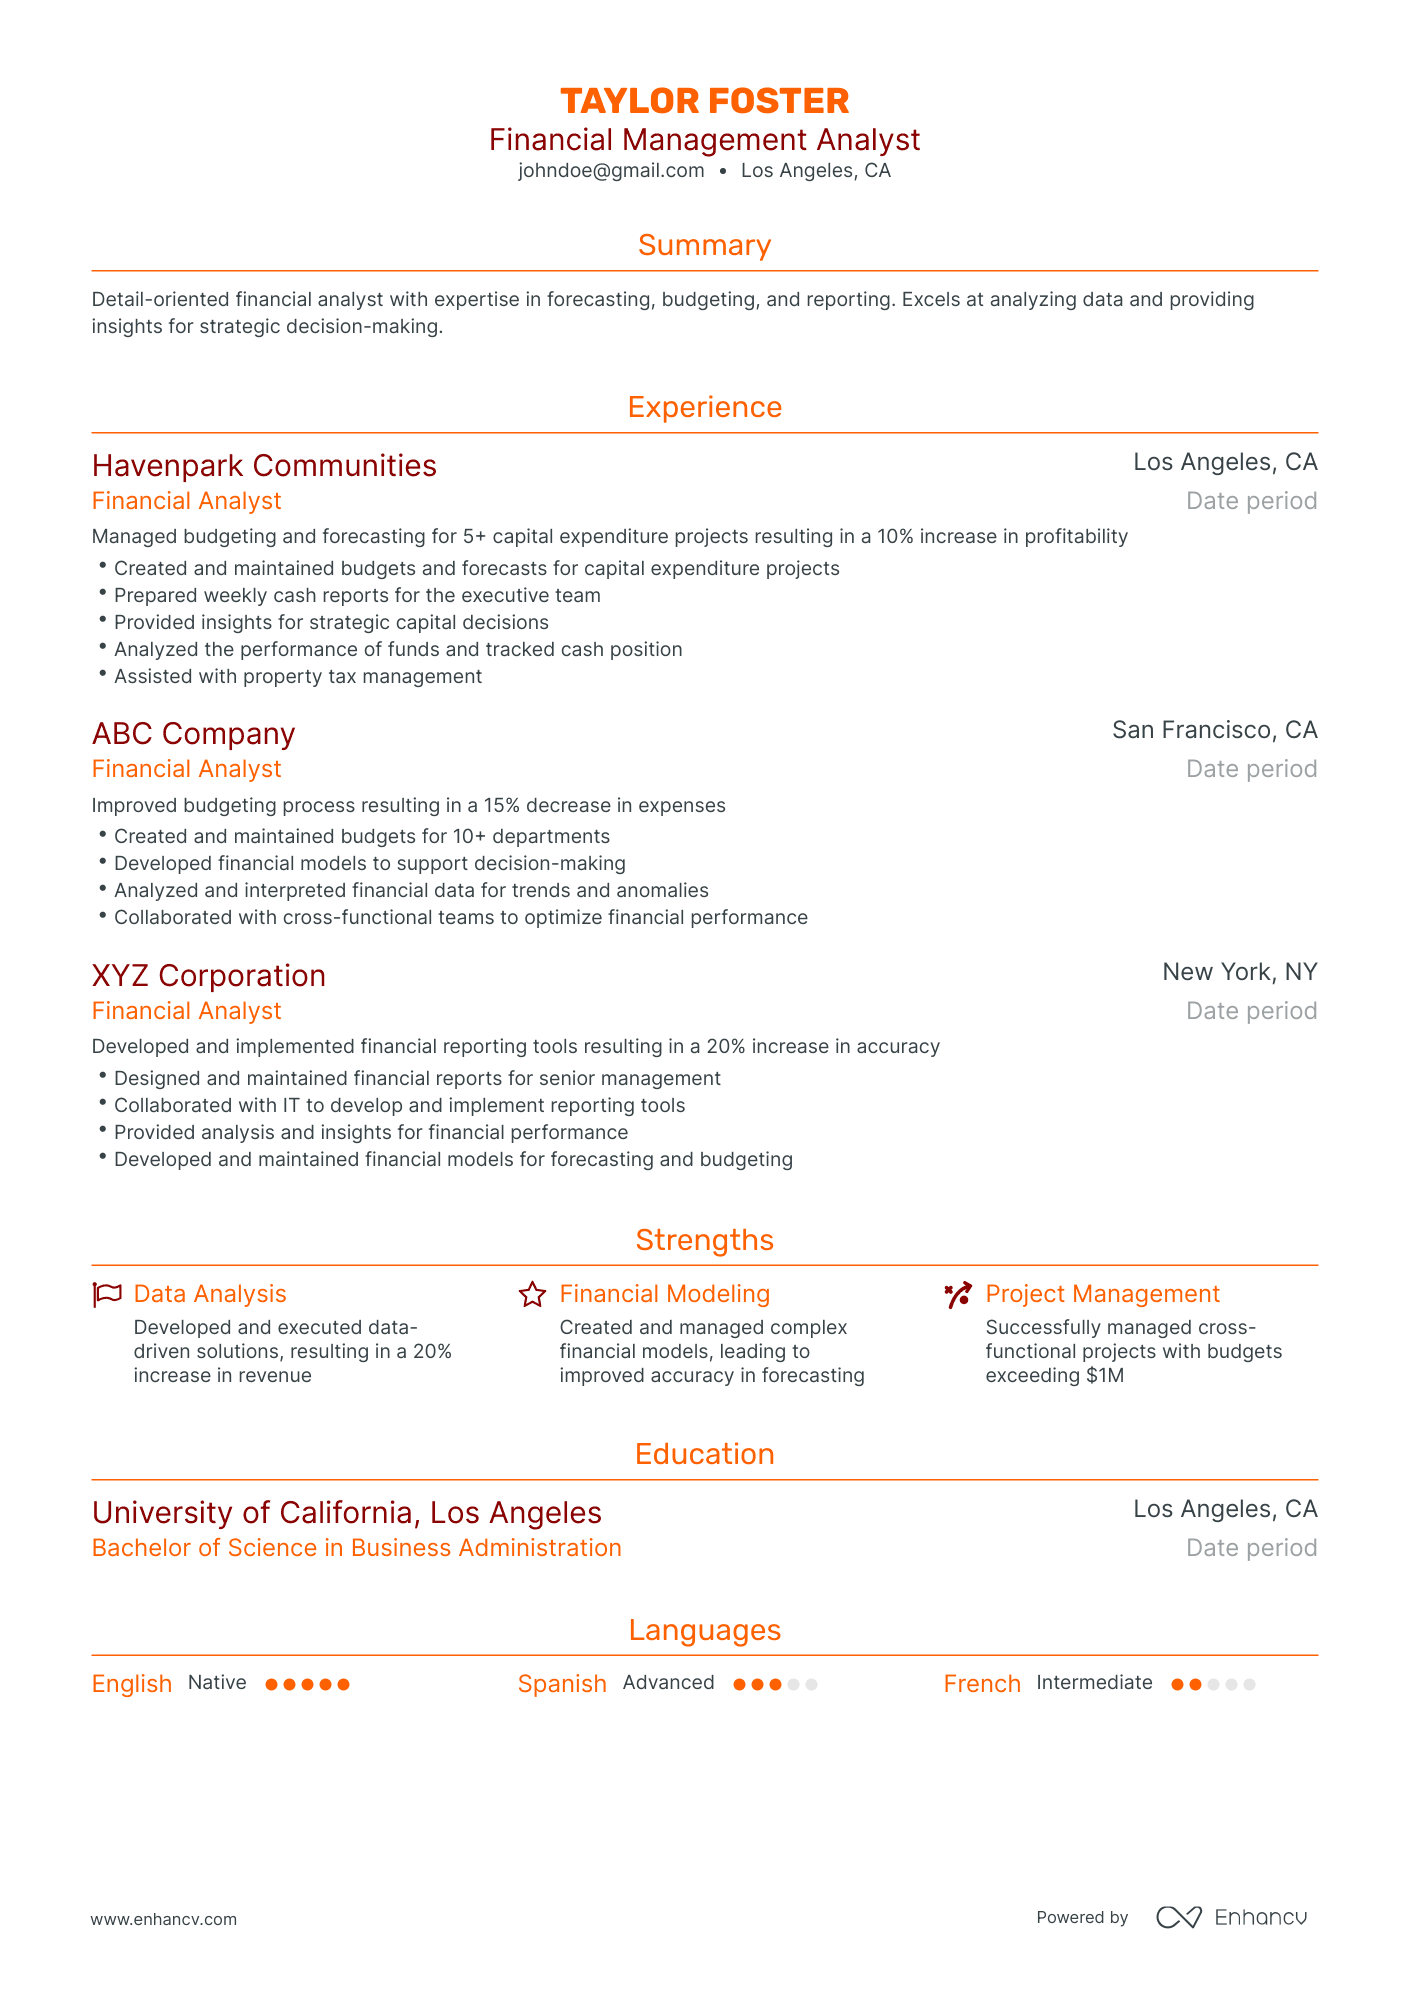 Traditional Financial Management Analyst Resume Template